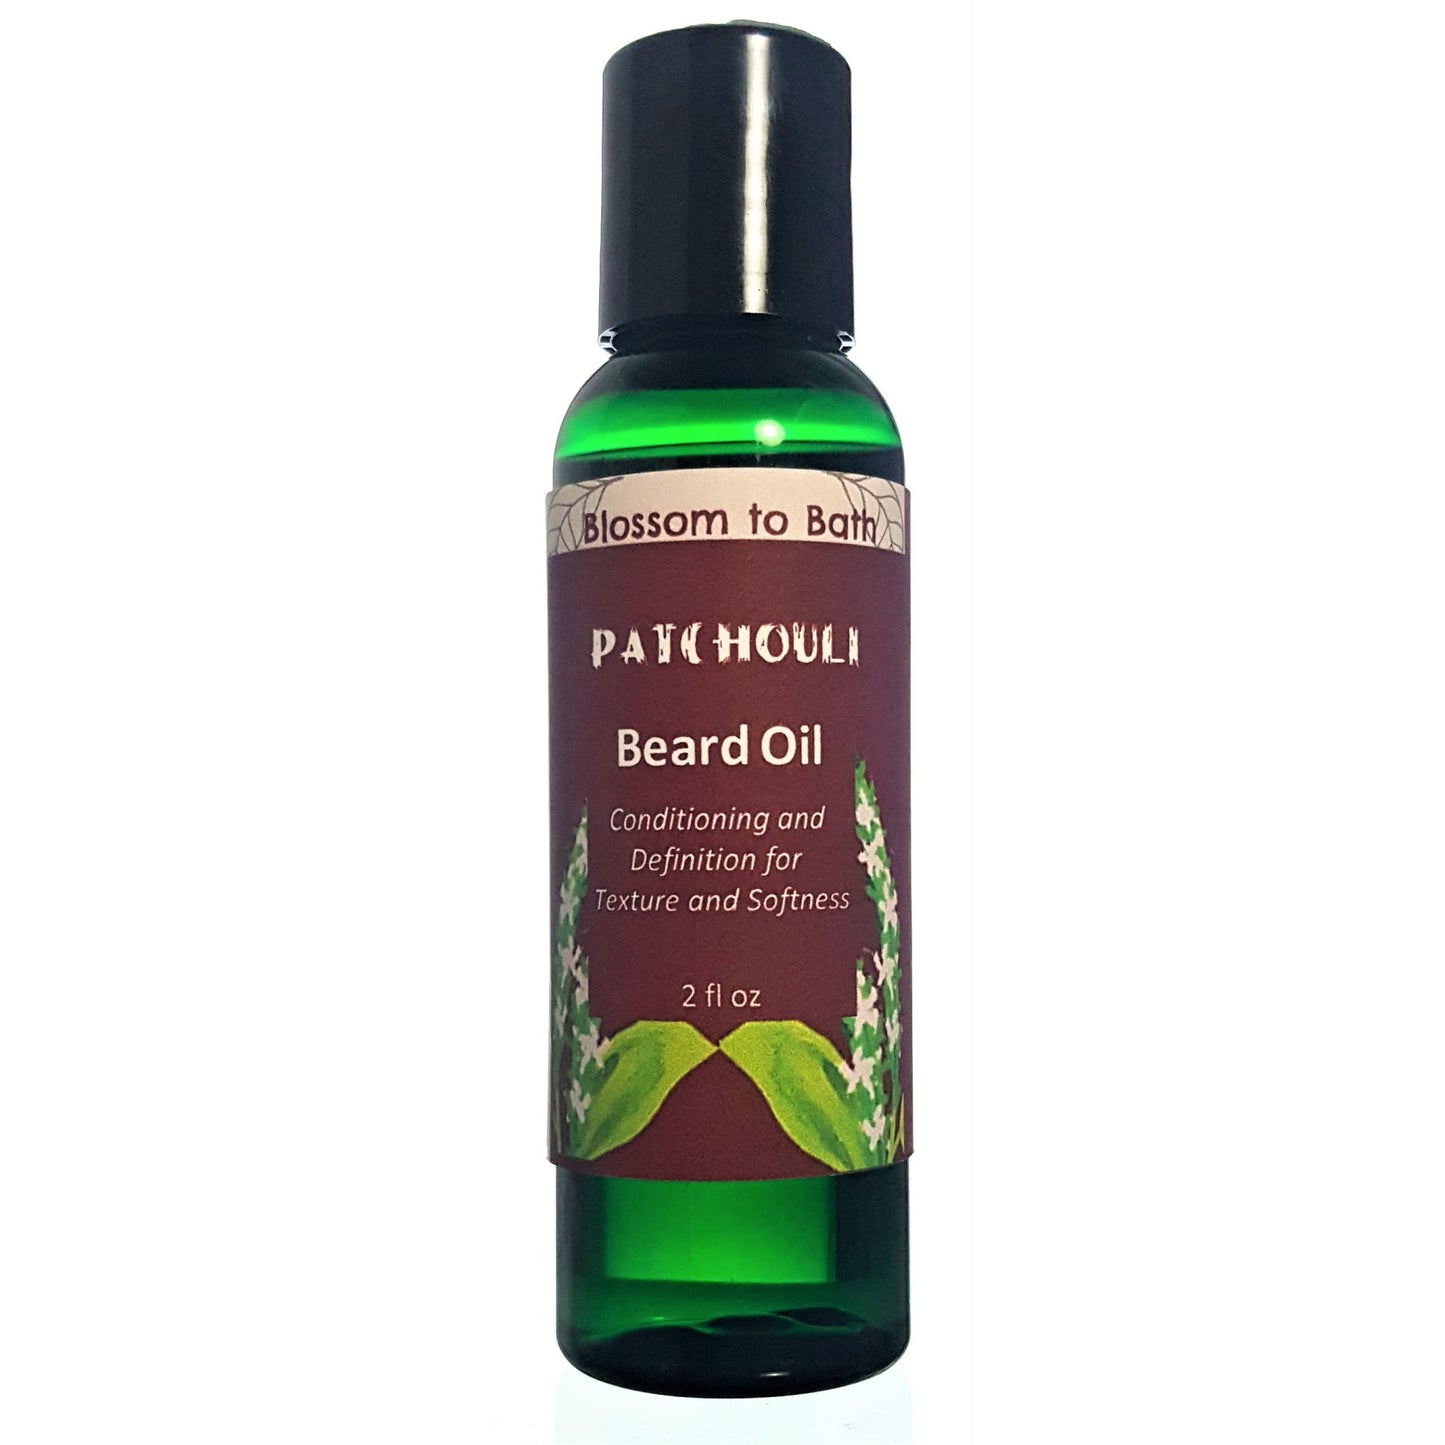 Buy Blossom to Bath Patchouli Beard Oil from Flowersong Soap Studio.  Deepen beard tones and textures while softening with Organic oils to keep your beard at its groomed, conditioned best  The pure earthy, woody, spicy scent of straight Patchouli.